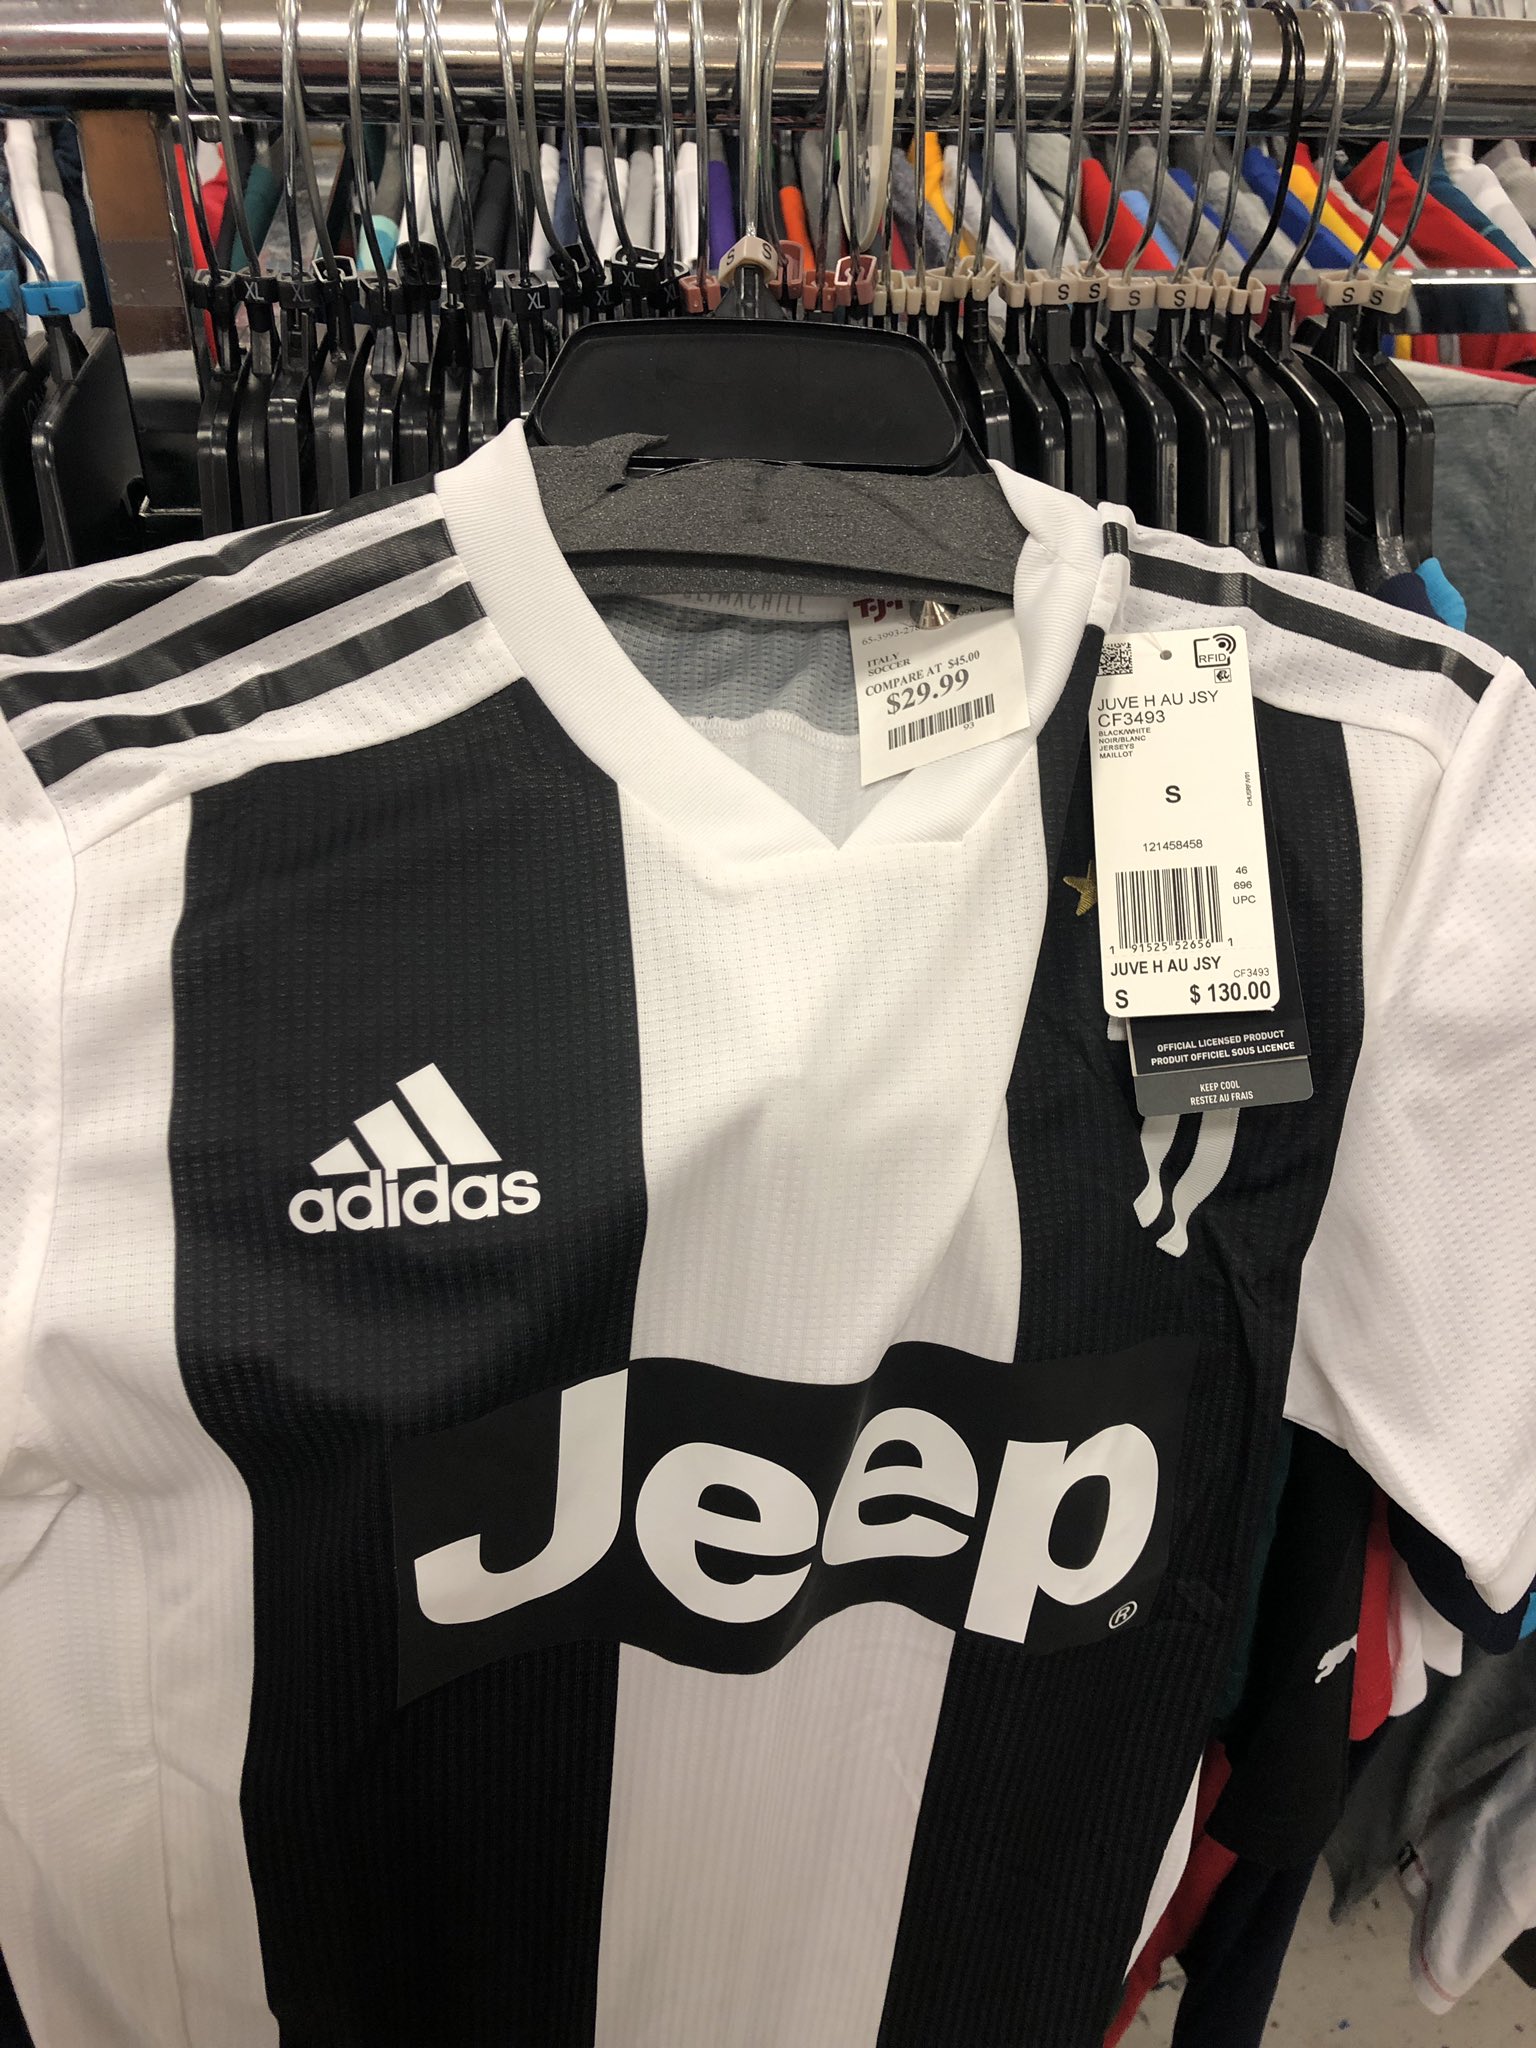 USWNT soccer ball or $30 Juve jersey 